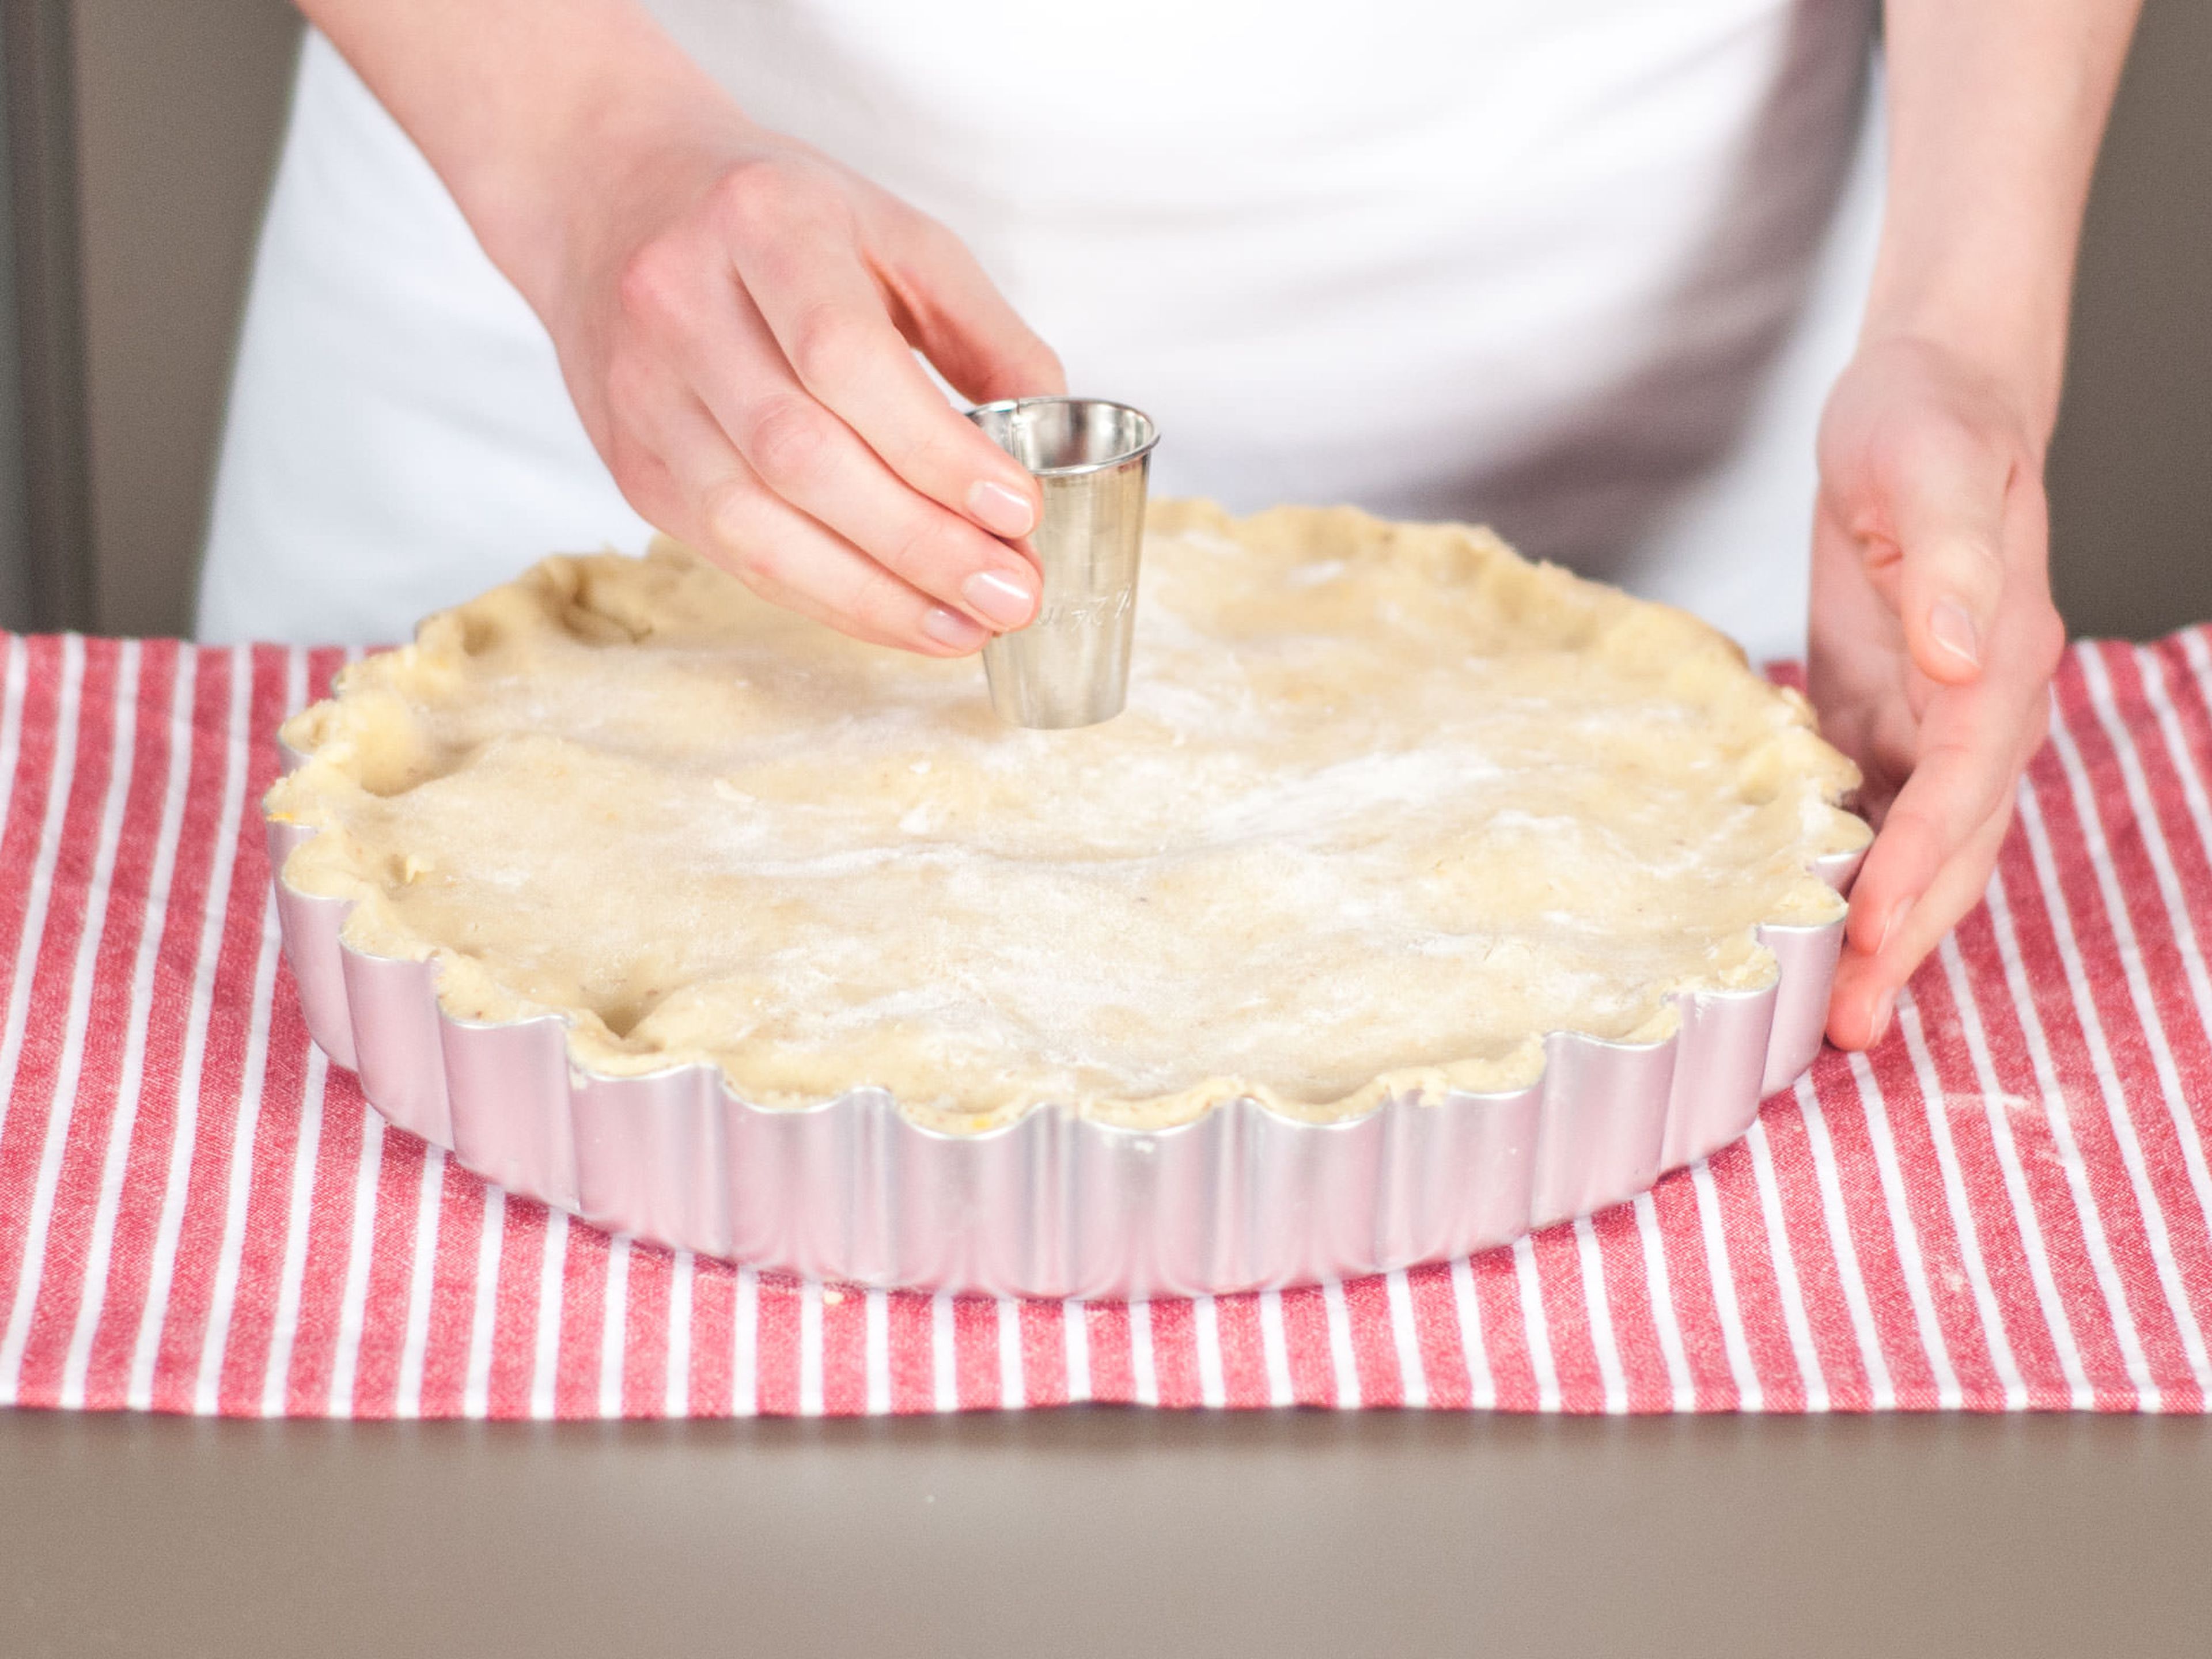 Place second half of dough on top and seal around edges. Make a small hole in the middle of the pie with a round cookie cutter to allow air to escape while baking. Place pie in preheated oven at 160°C/325°F and bake until golden brown for approx. 65 - 75 min. Enjoy warm with ice cream or whipped cream.